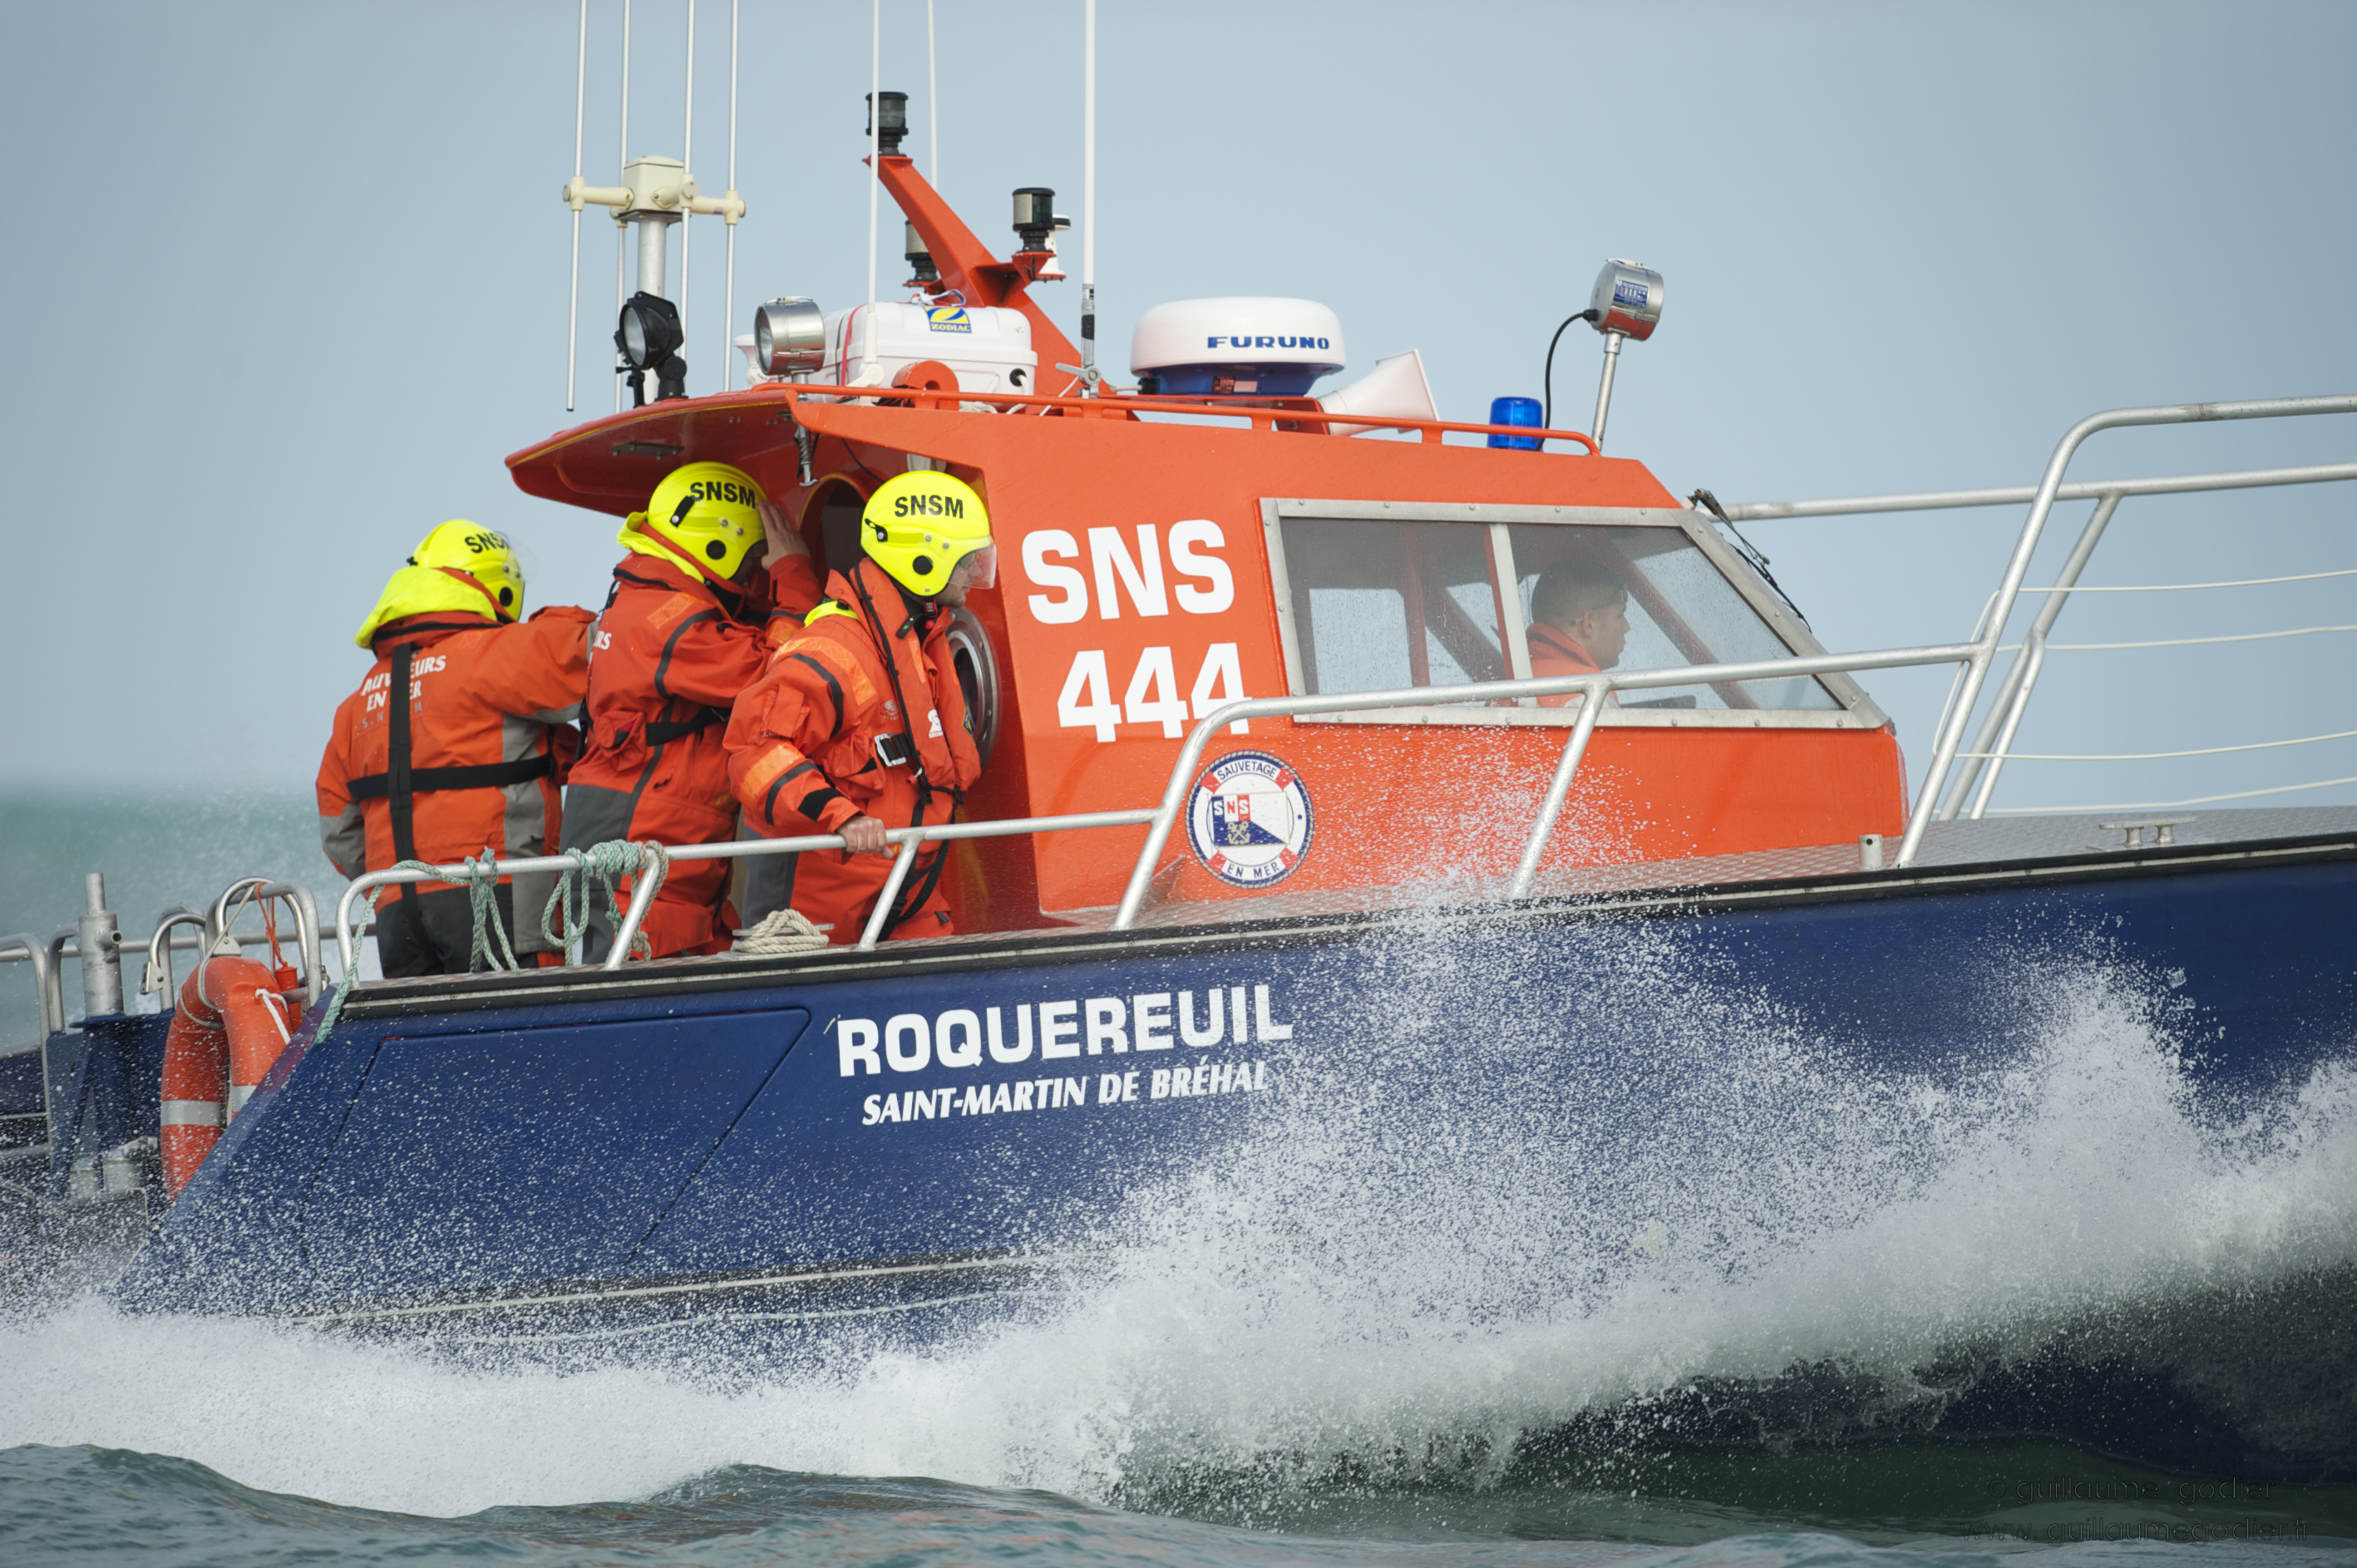 An SNSM rescue boat is operating at sea with its rescue team on the deck